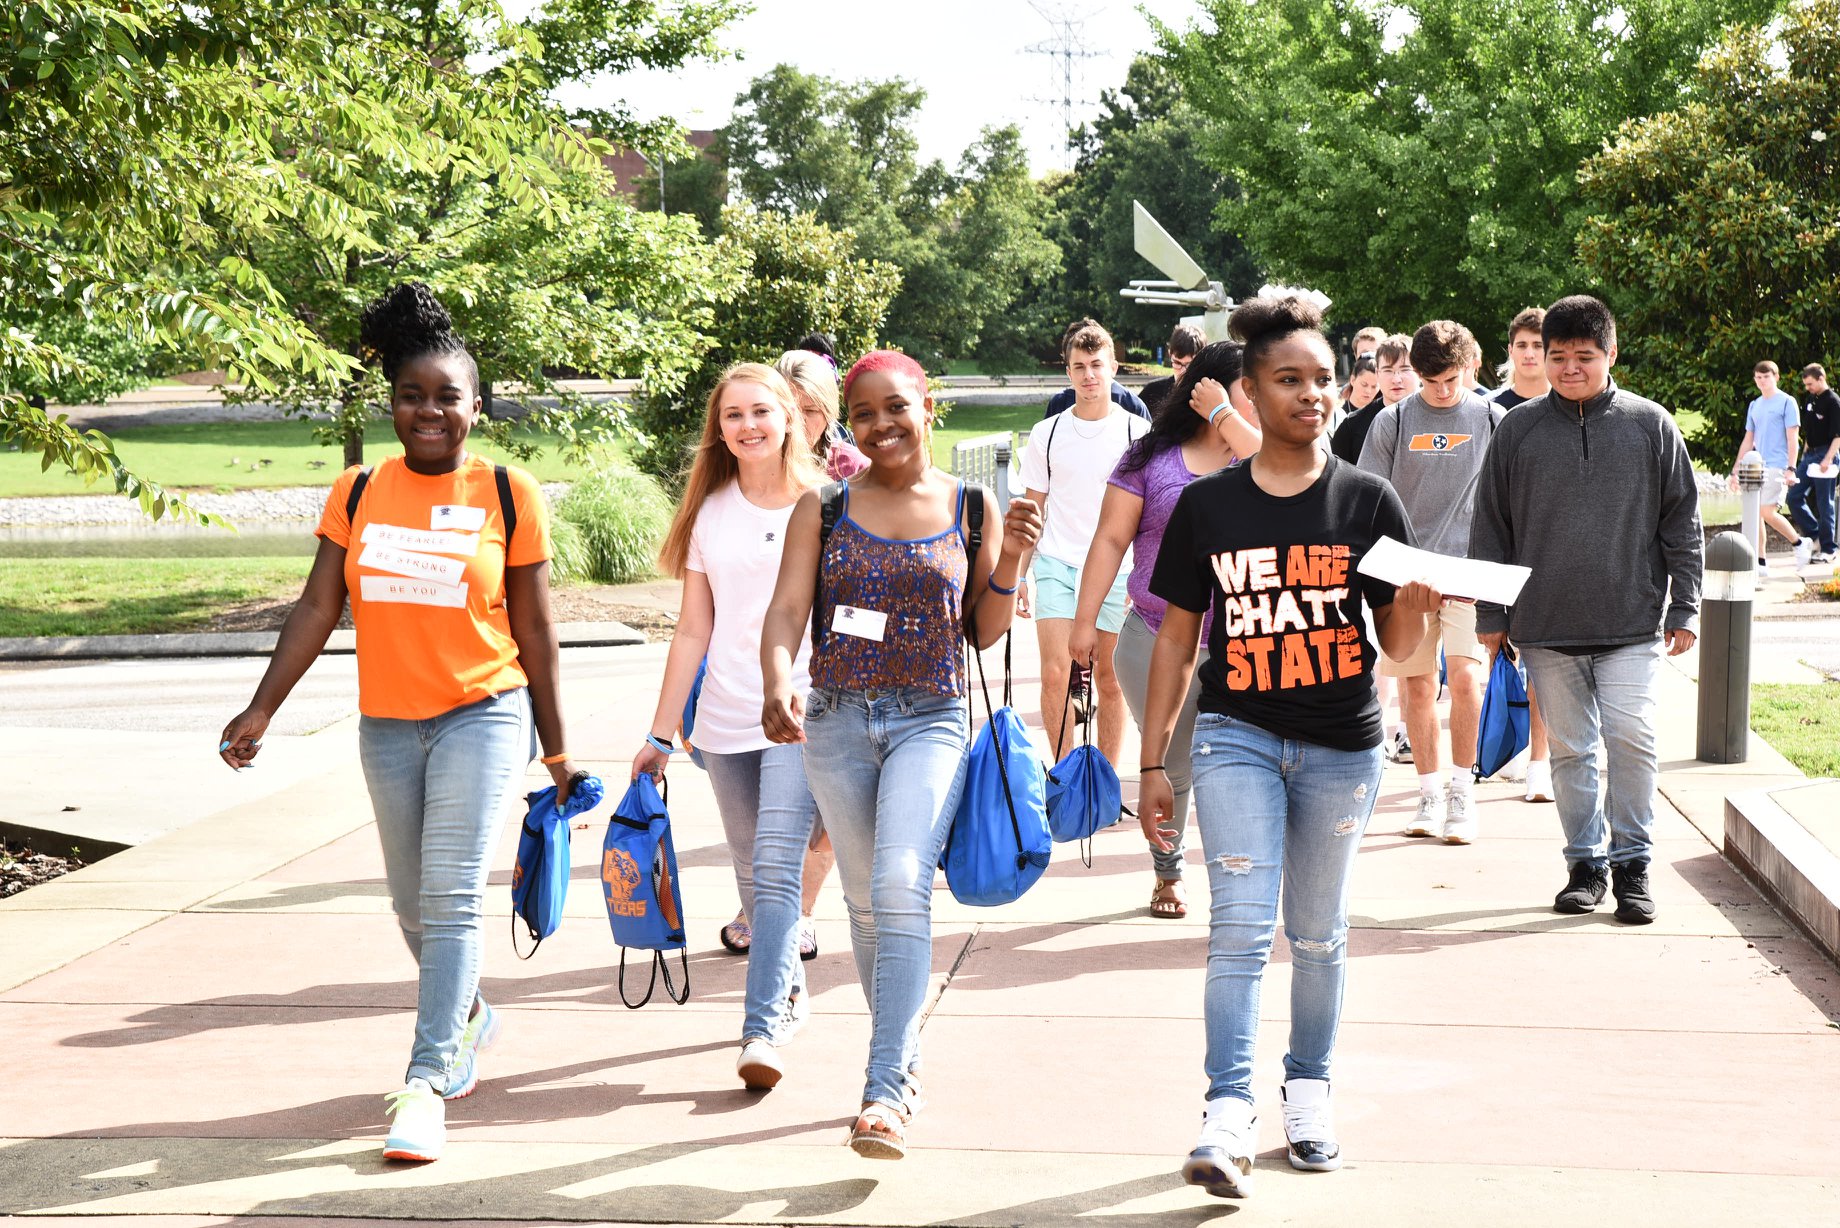  Students walking on sidewalk surrounded by trees at ChattState.